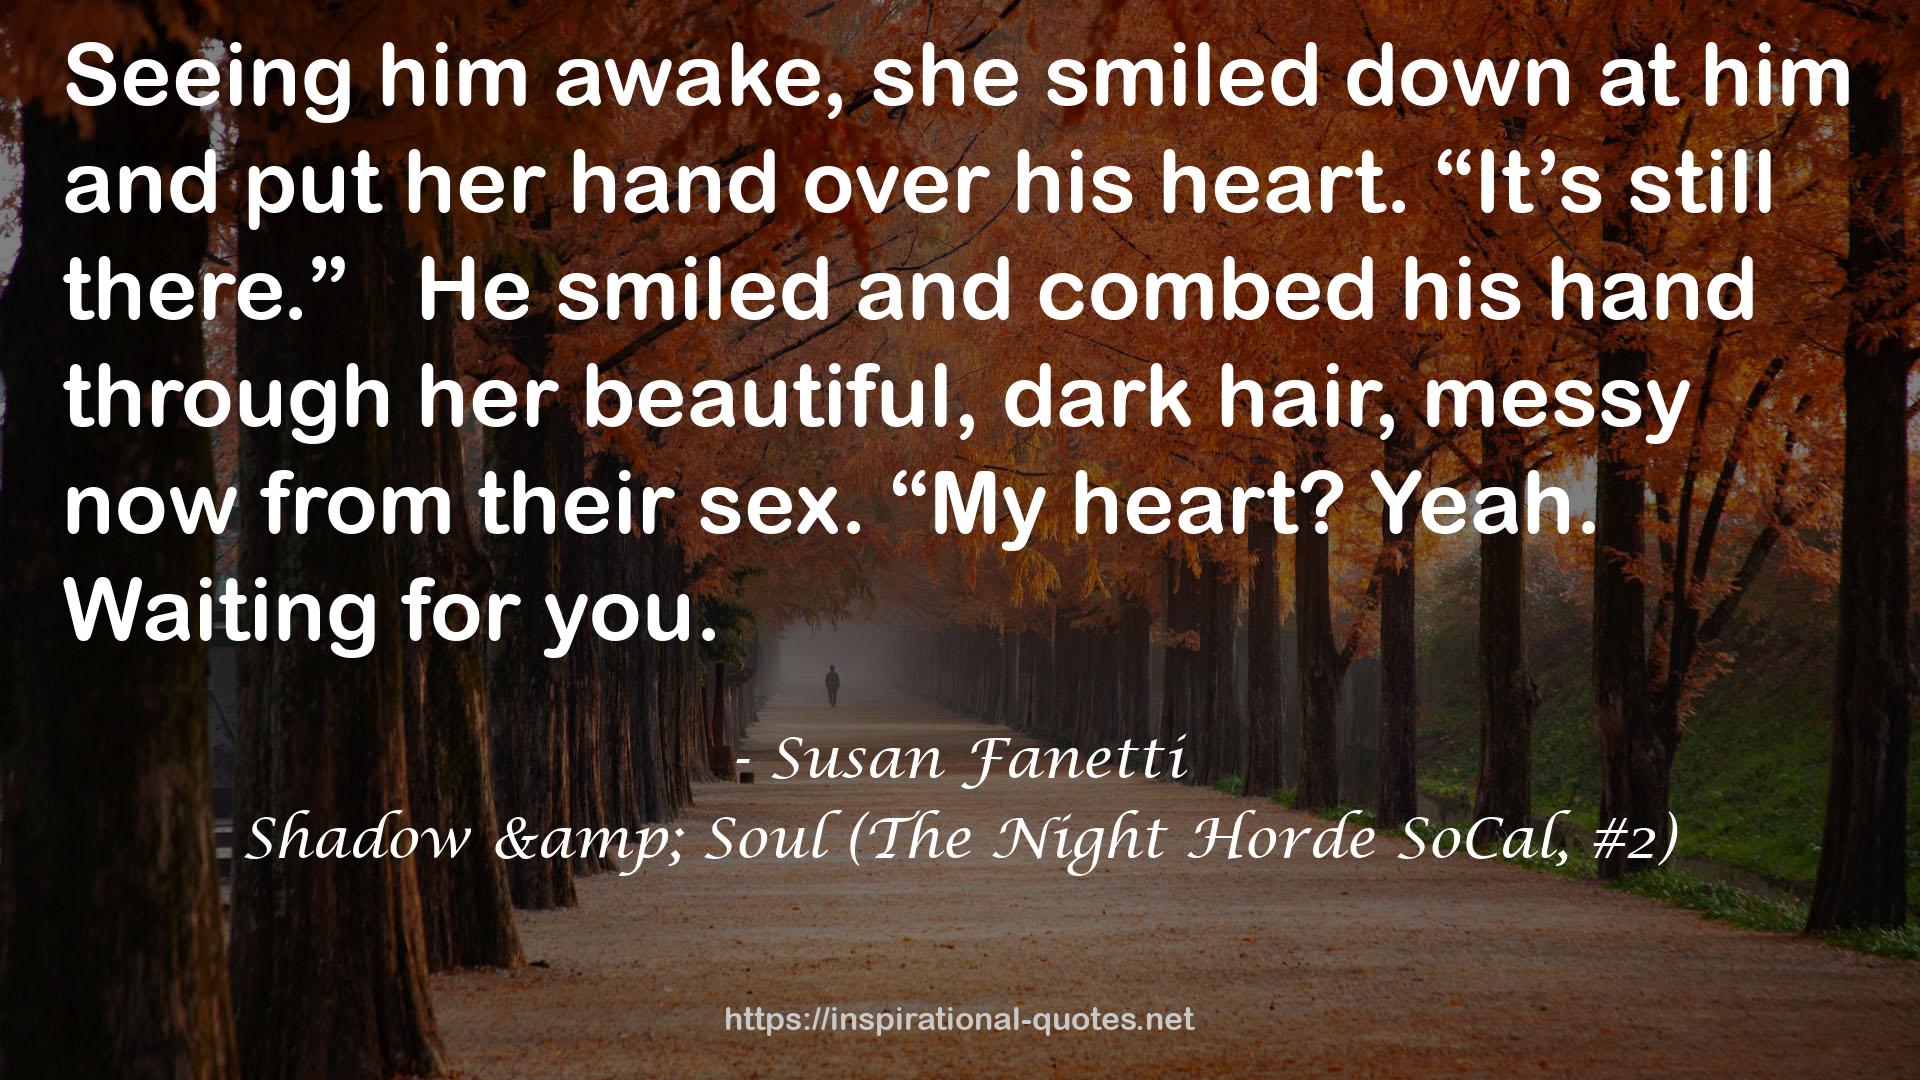 Shadow & Soul (The Night Horde SoCal, #2) QUOTES